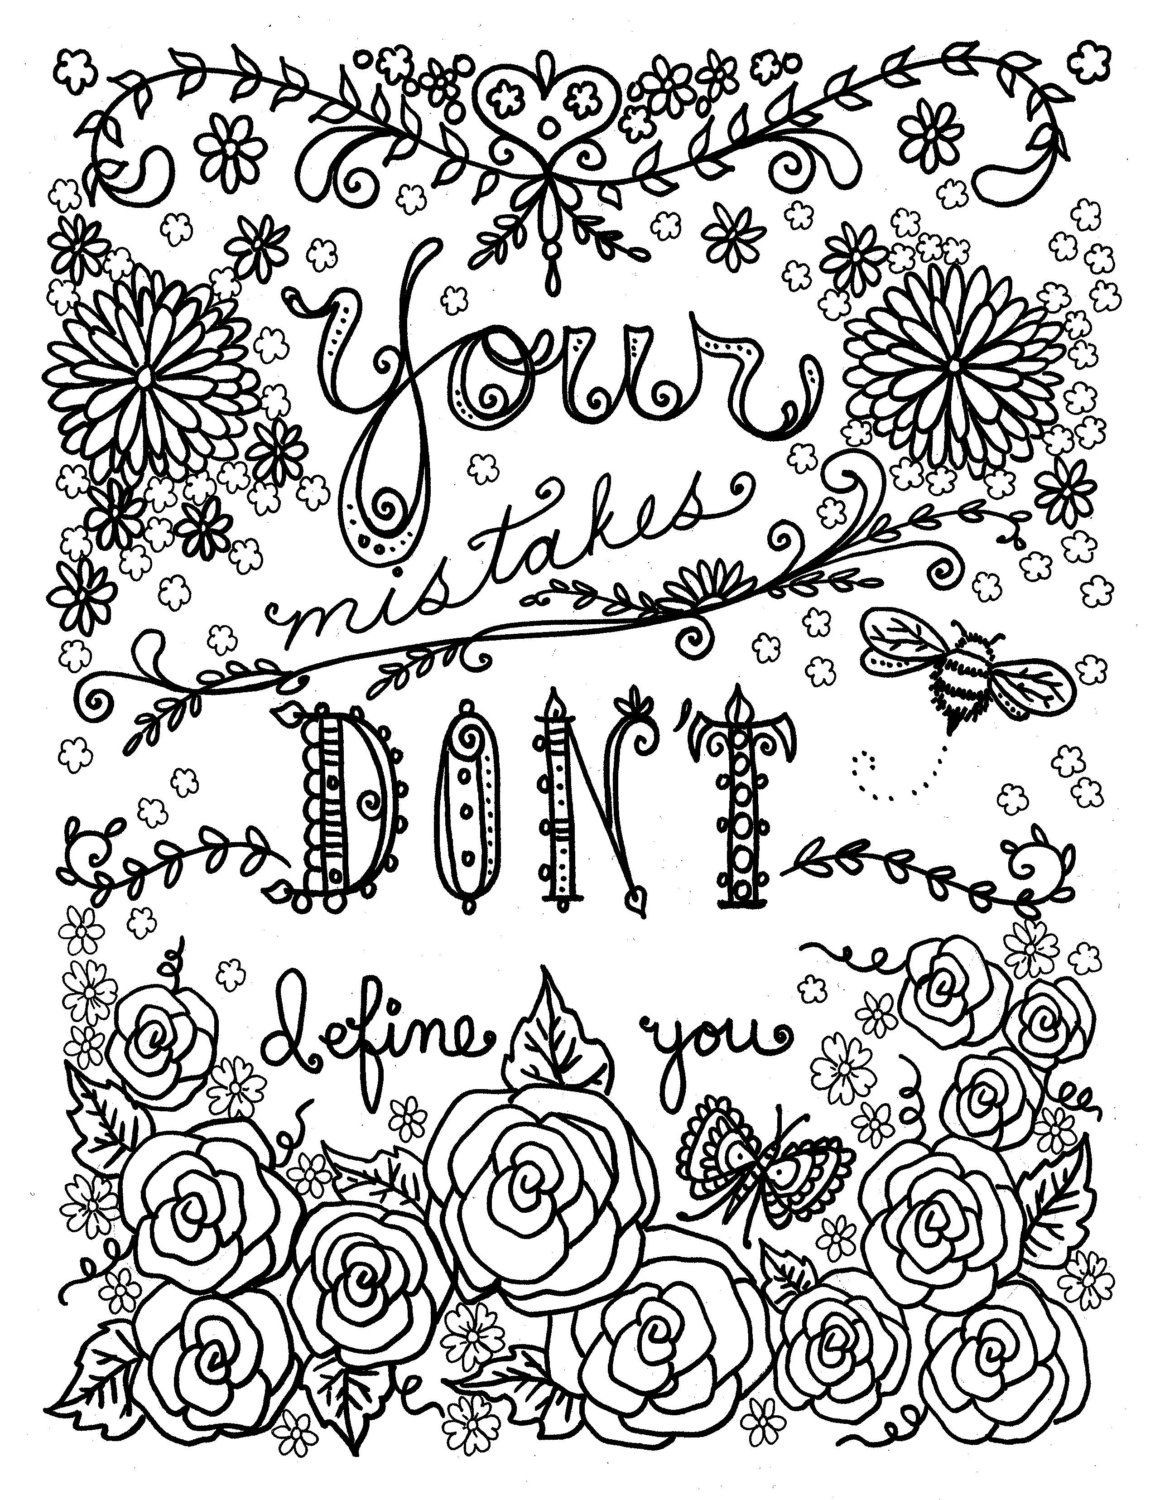 Quotes Coloring Pages For Adults
 Pin by iDMe on Embroidery